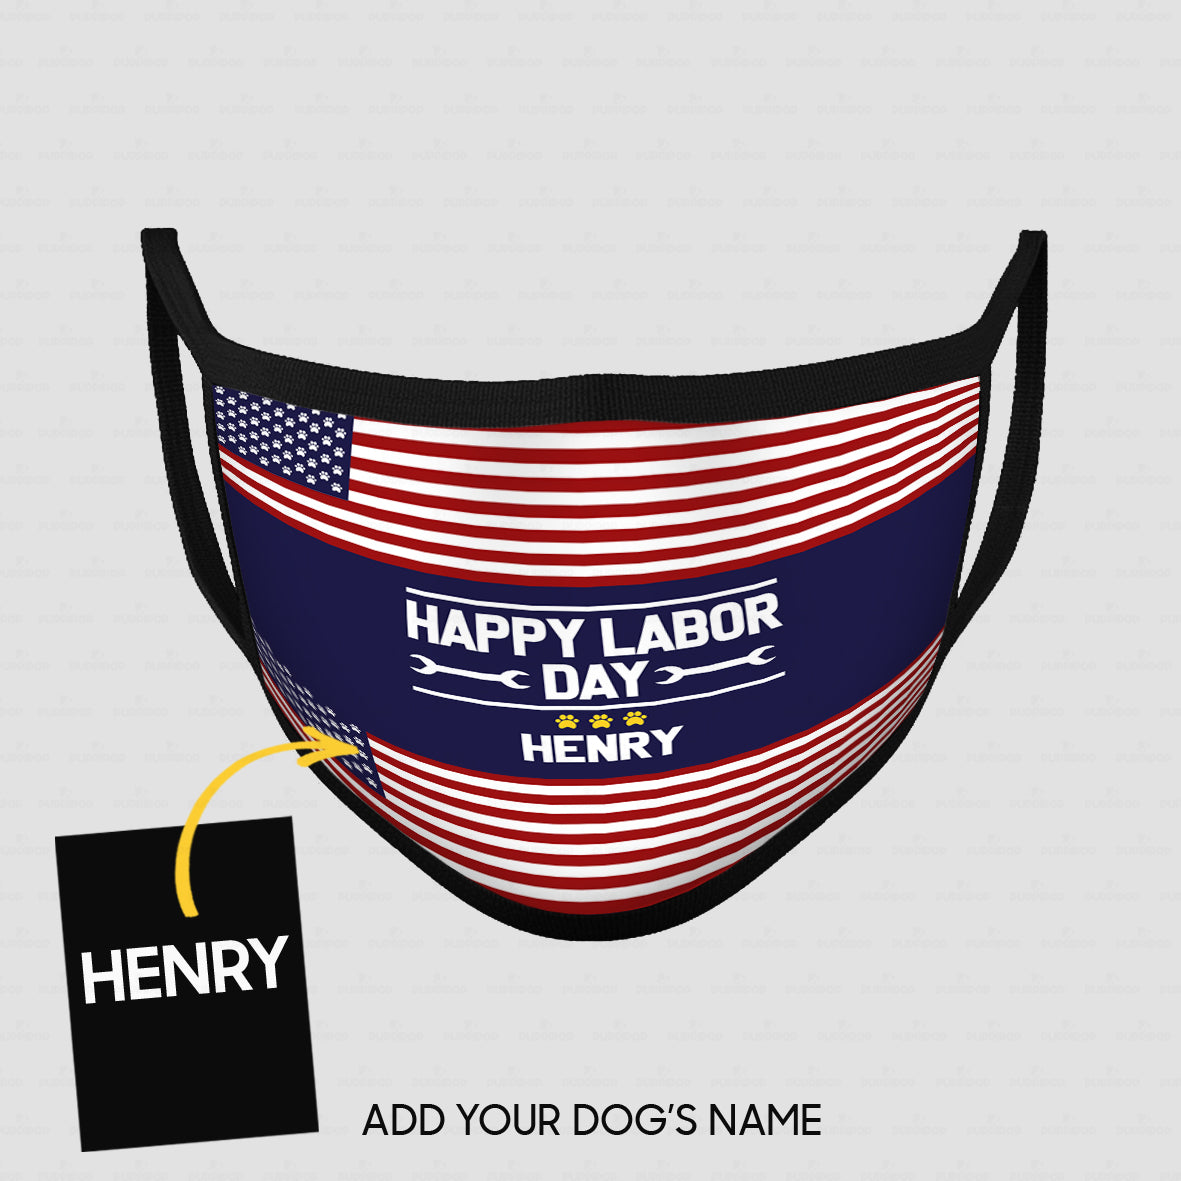 Personalized Dog Gift Idea - Happy Labor Day Proud Day For Dog Lovers - Cloth Mask